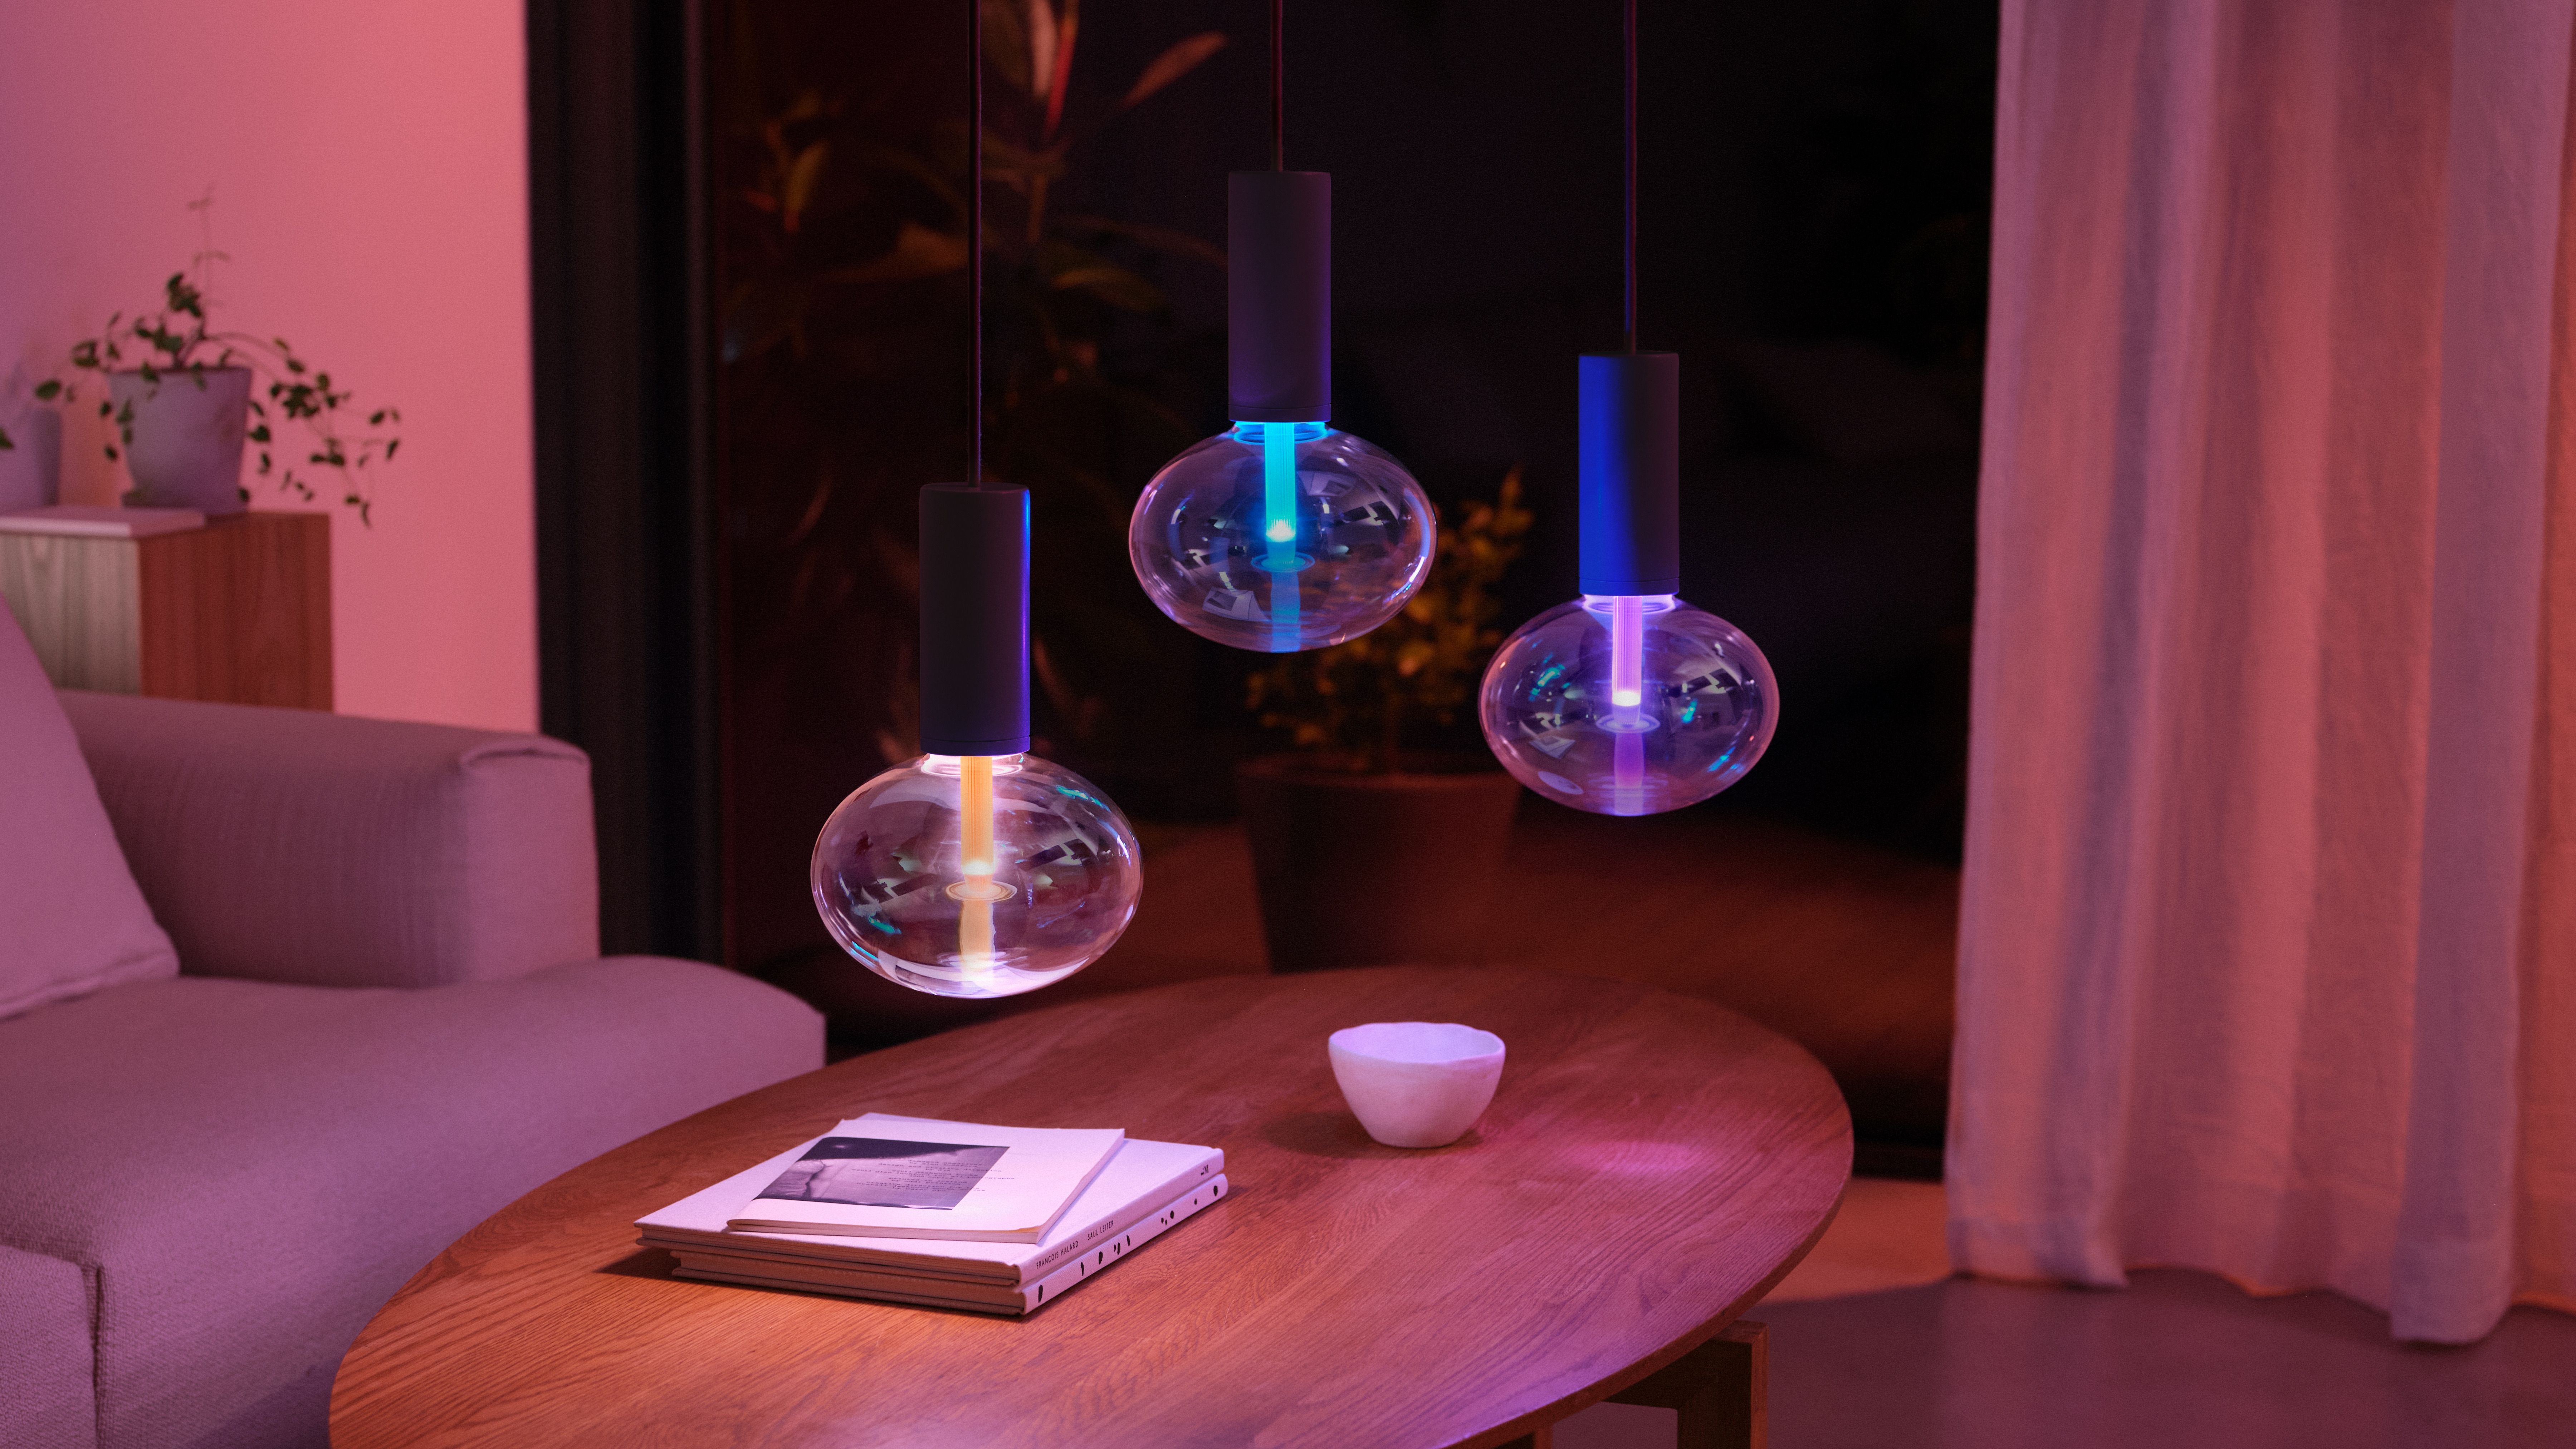 Three Philips Hue pendant lamps over a coffee table